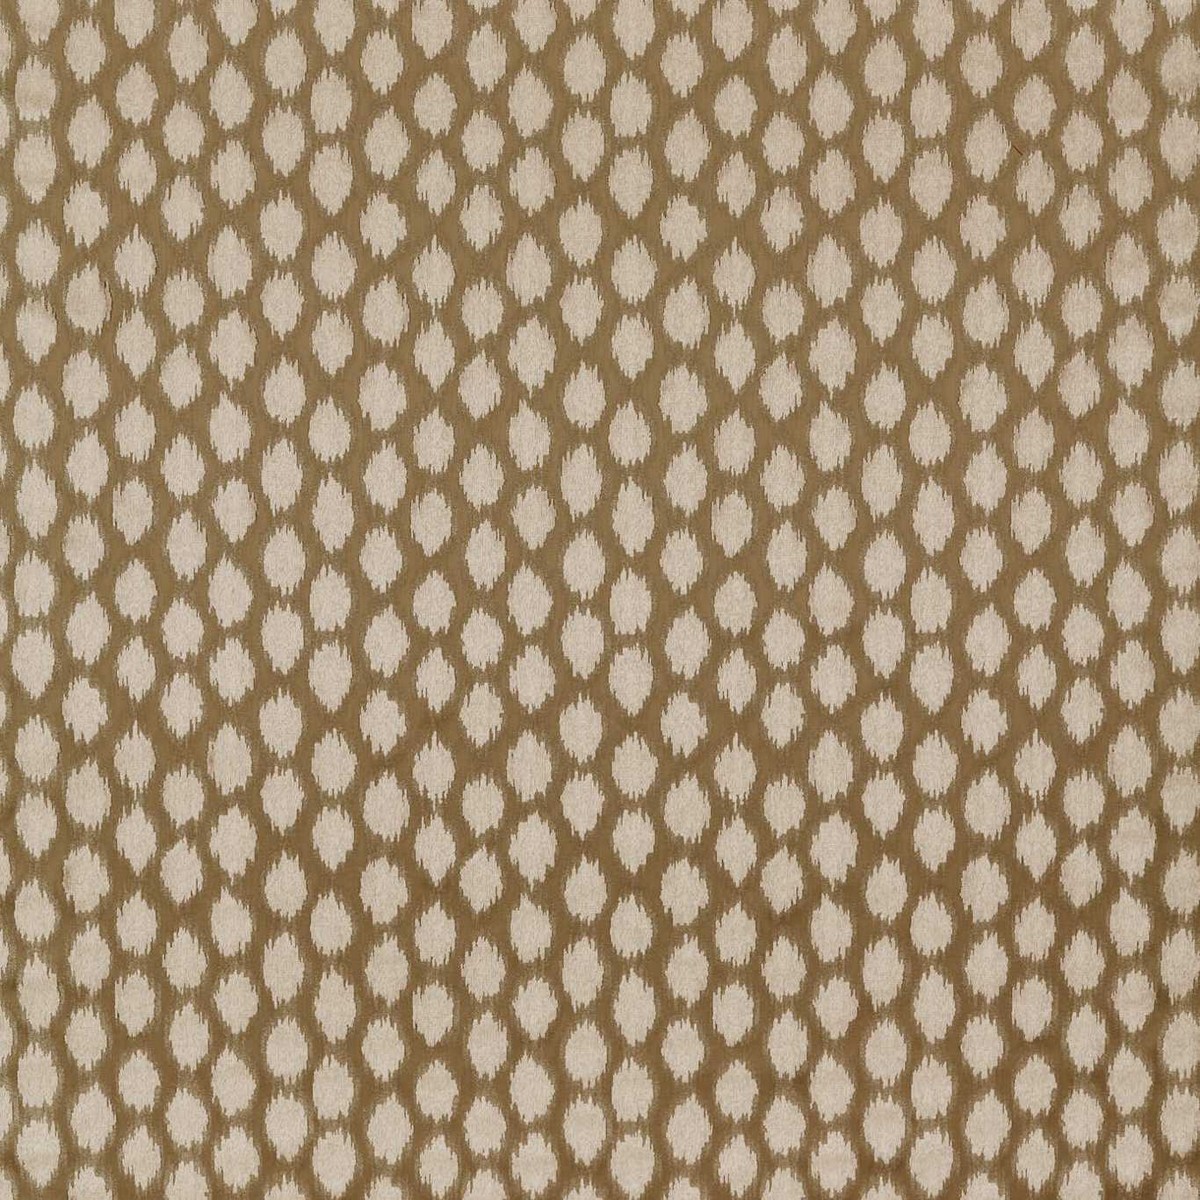 Ikat Spot Antique/Gold Fabric by Zoffany